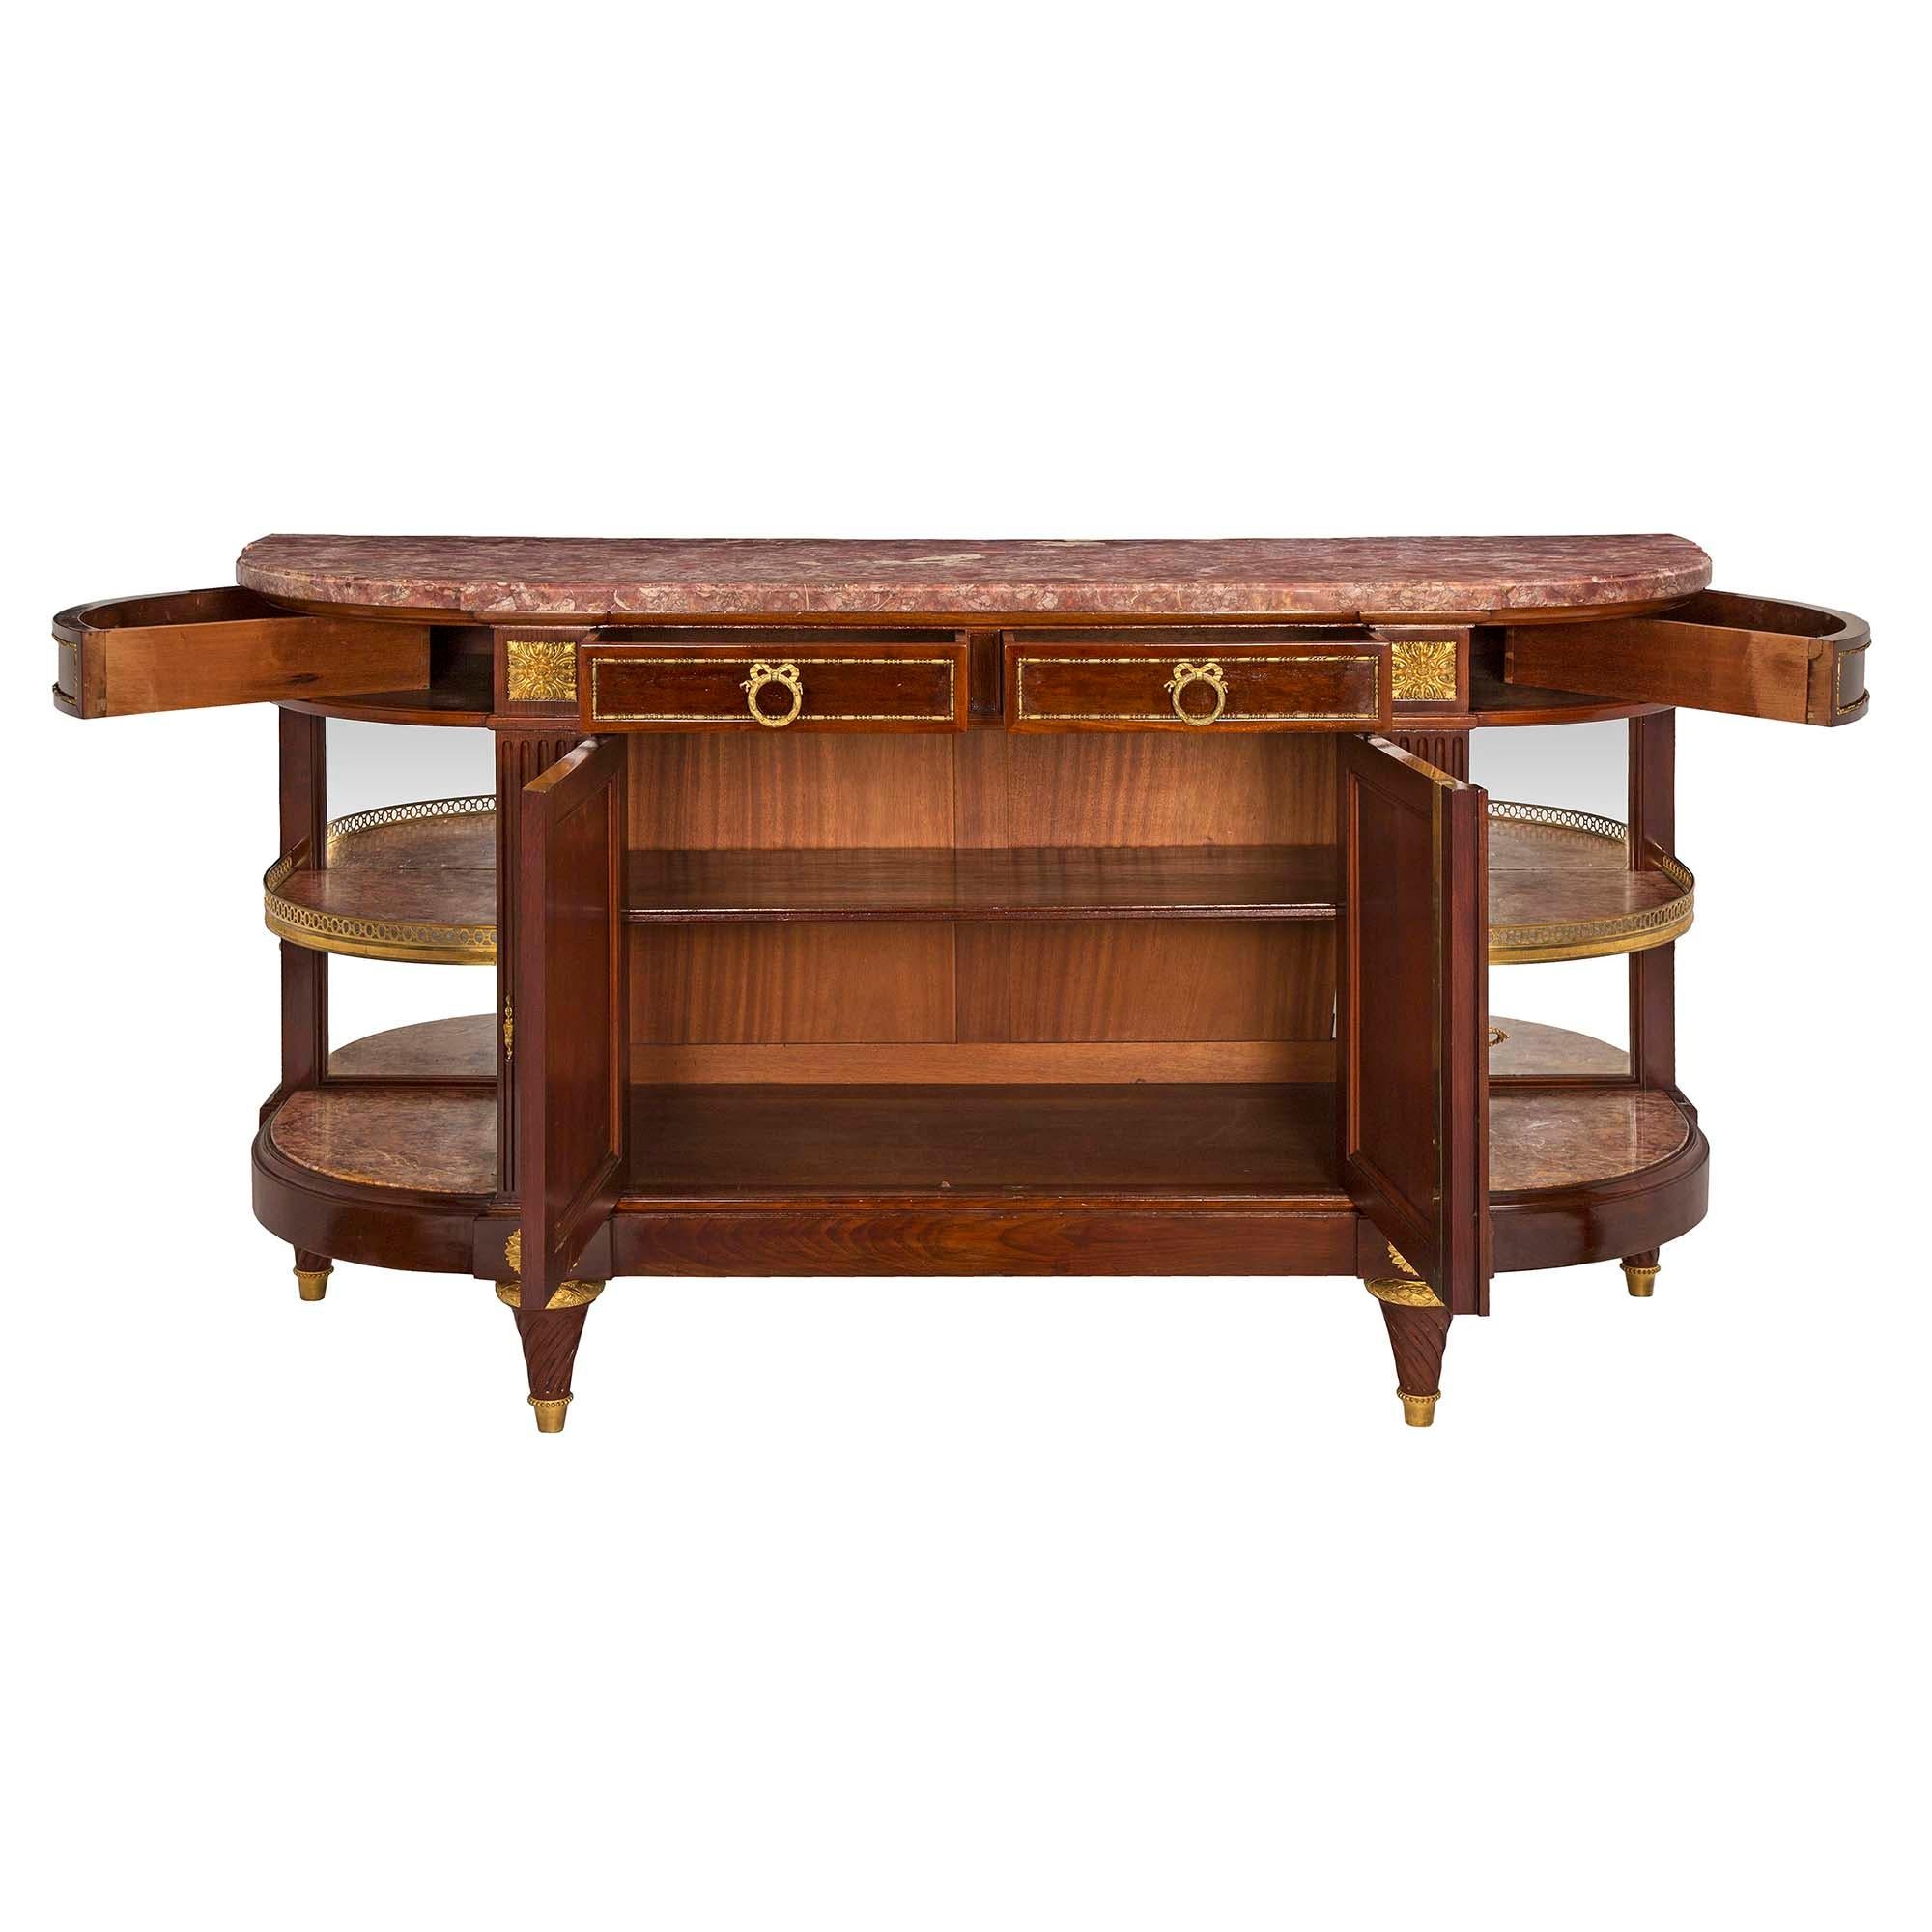 French 19th Century Louis XVI Style Mahogany and Ormolu Buffet In Good Condition For Sale In West Palm Beach, FL